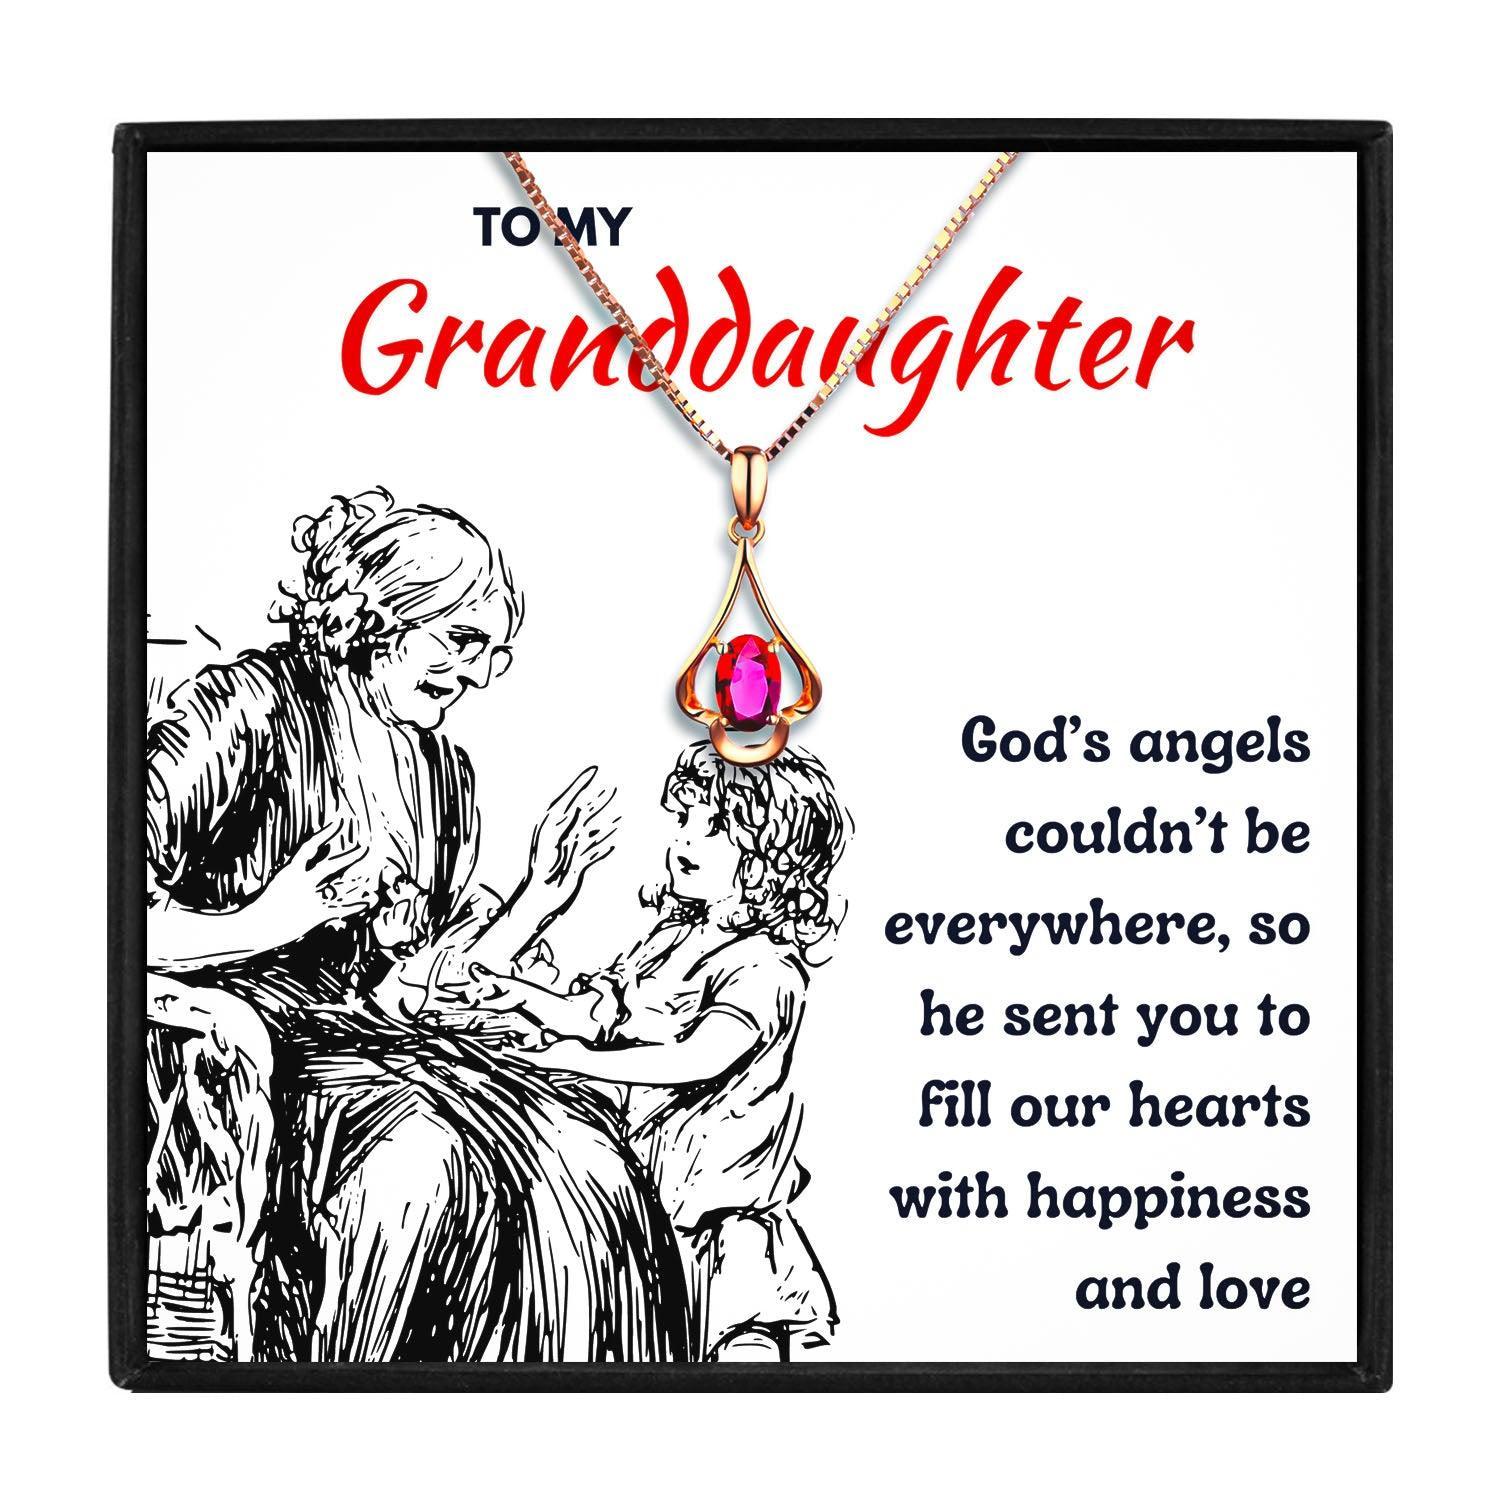 Gifts for Granddaughter That They'll Extremely Want for Christmas 2023 | Gifts for Granddaughter That They'll Extremely Want - undefined | granddaughter gift, granddaughter gifts from nana, Granddaughter Necklace, great granddaughter gifts, jewelry for granddaughter from grandmother | From Hunny Life | hunnylife.com